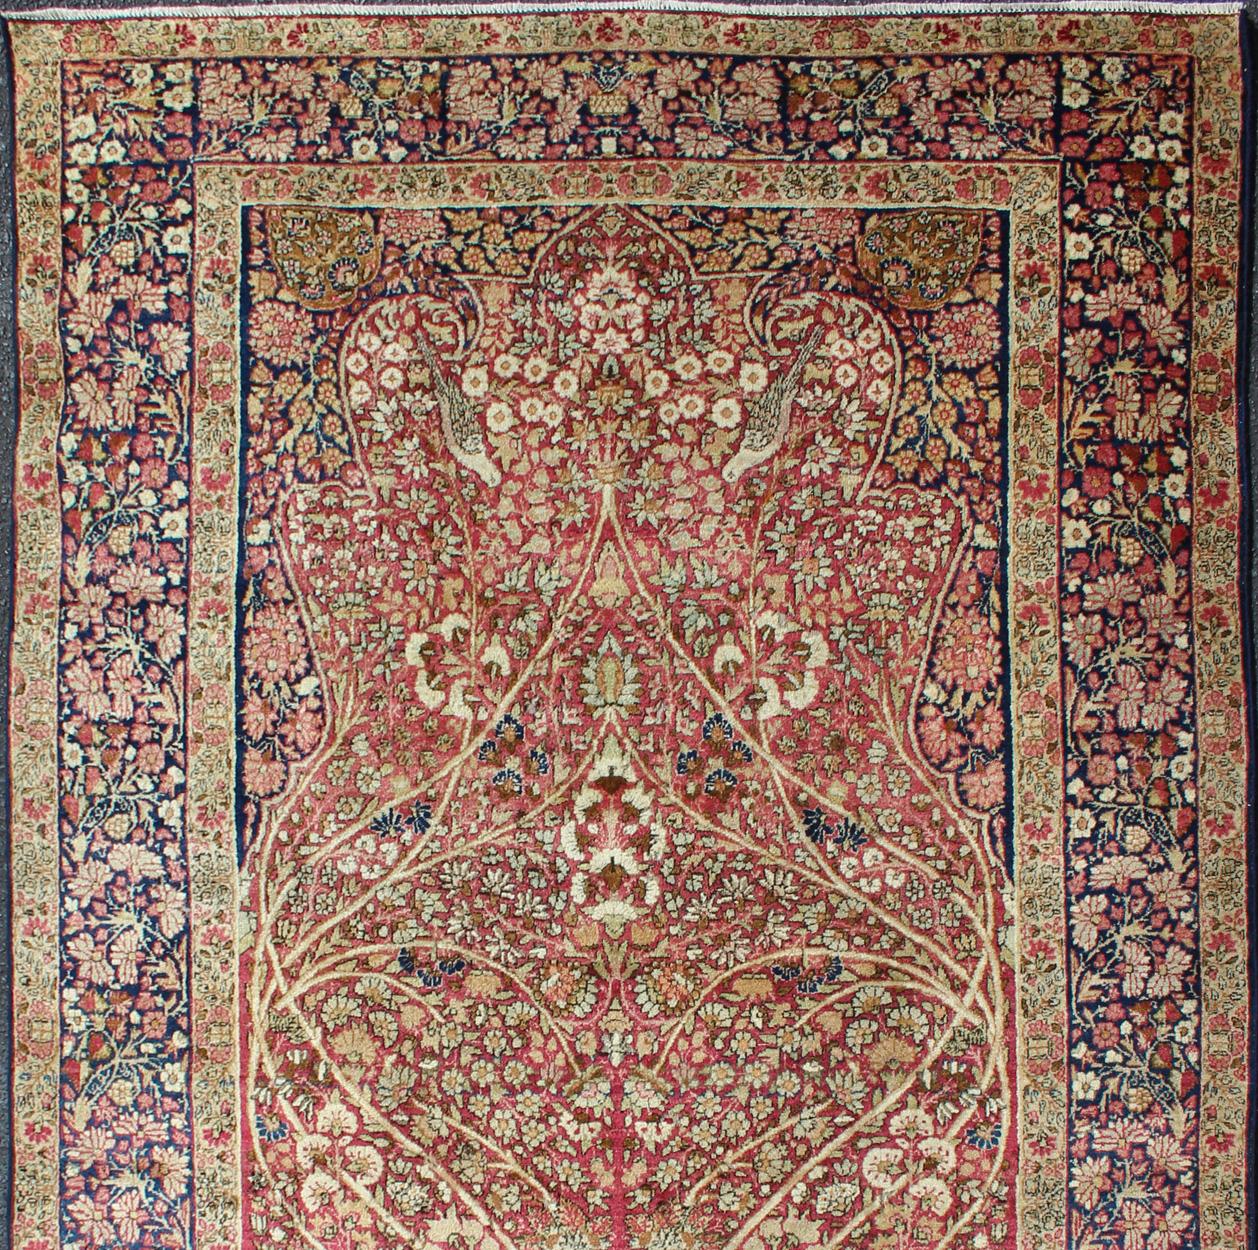 Ornately detailed antique Persian Lavar Kerman rug replicating trees, branches and birds in a forest Design, rug KBE-200205, country of origin / type: Iran / Lavar Kerman, circa 1900.

This Lovely antique Persian Lavar Kerman rug features an ornate